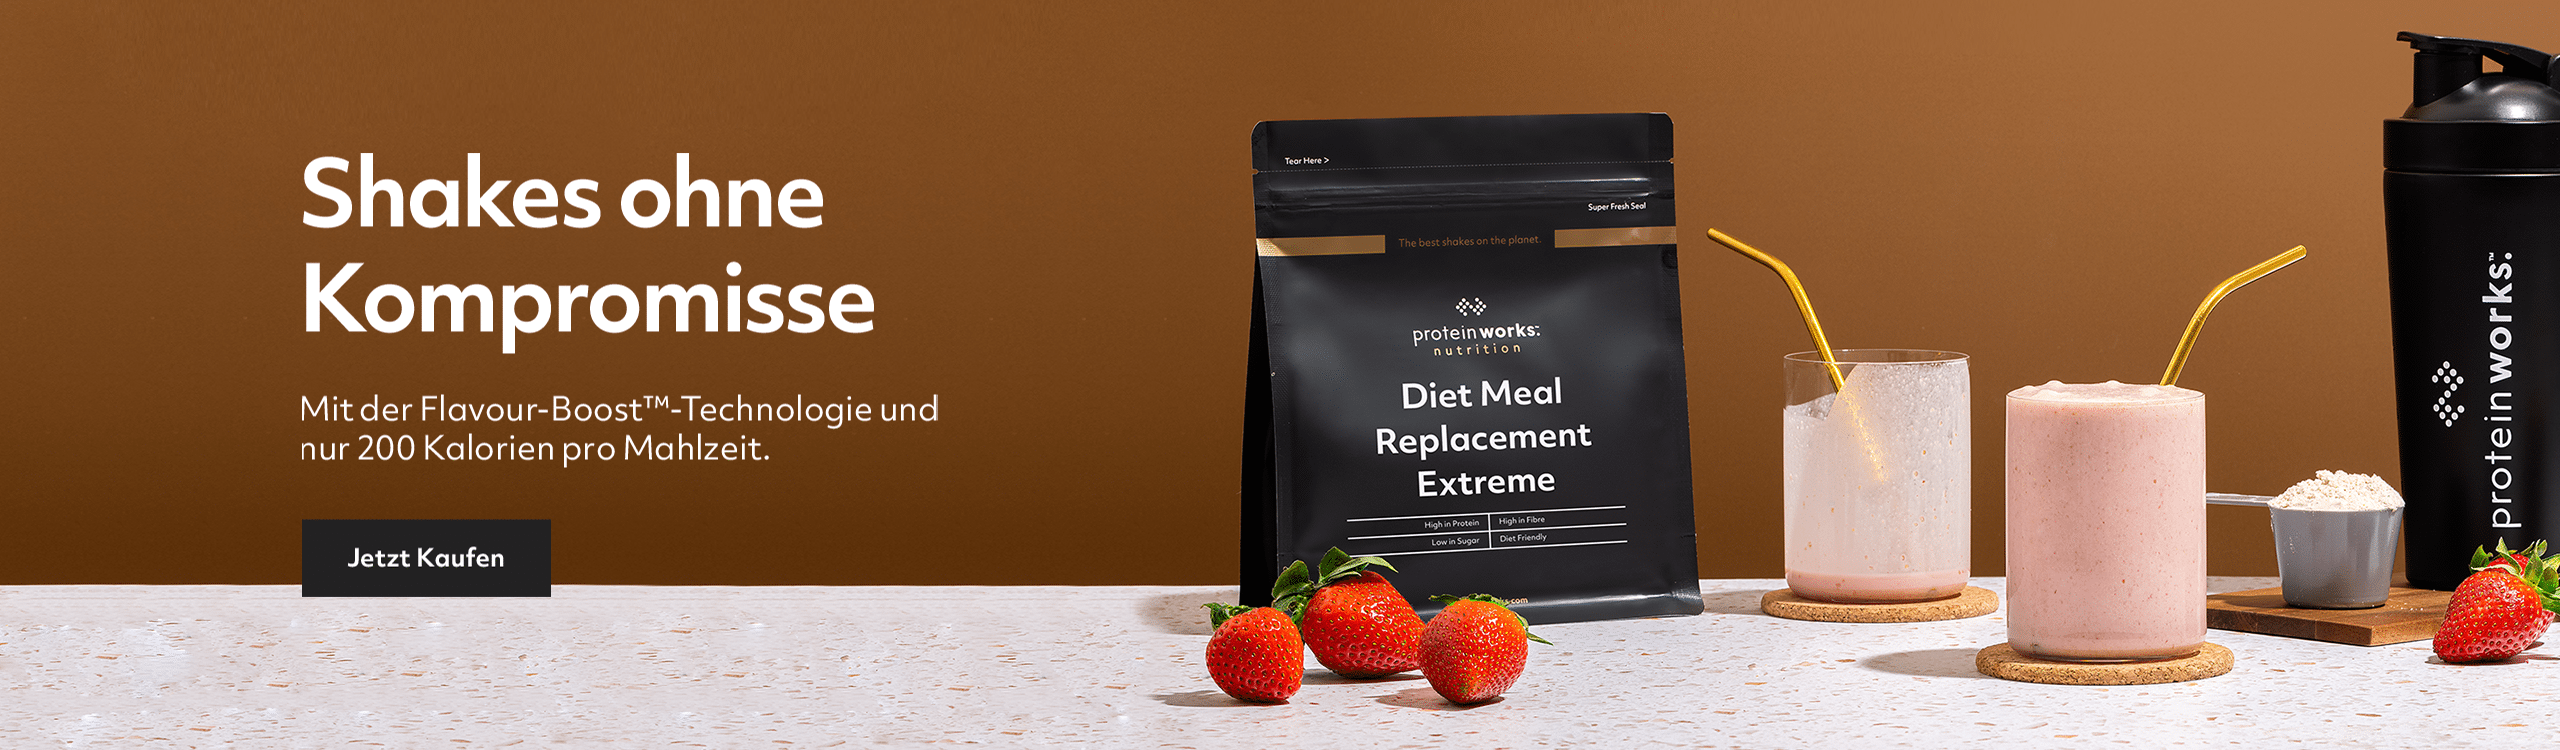 /diet-meal-replacement-extreme